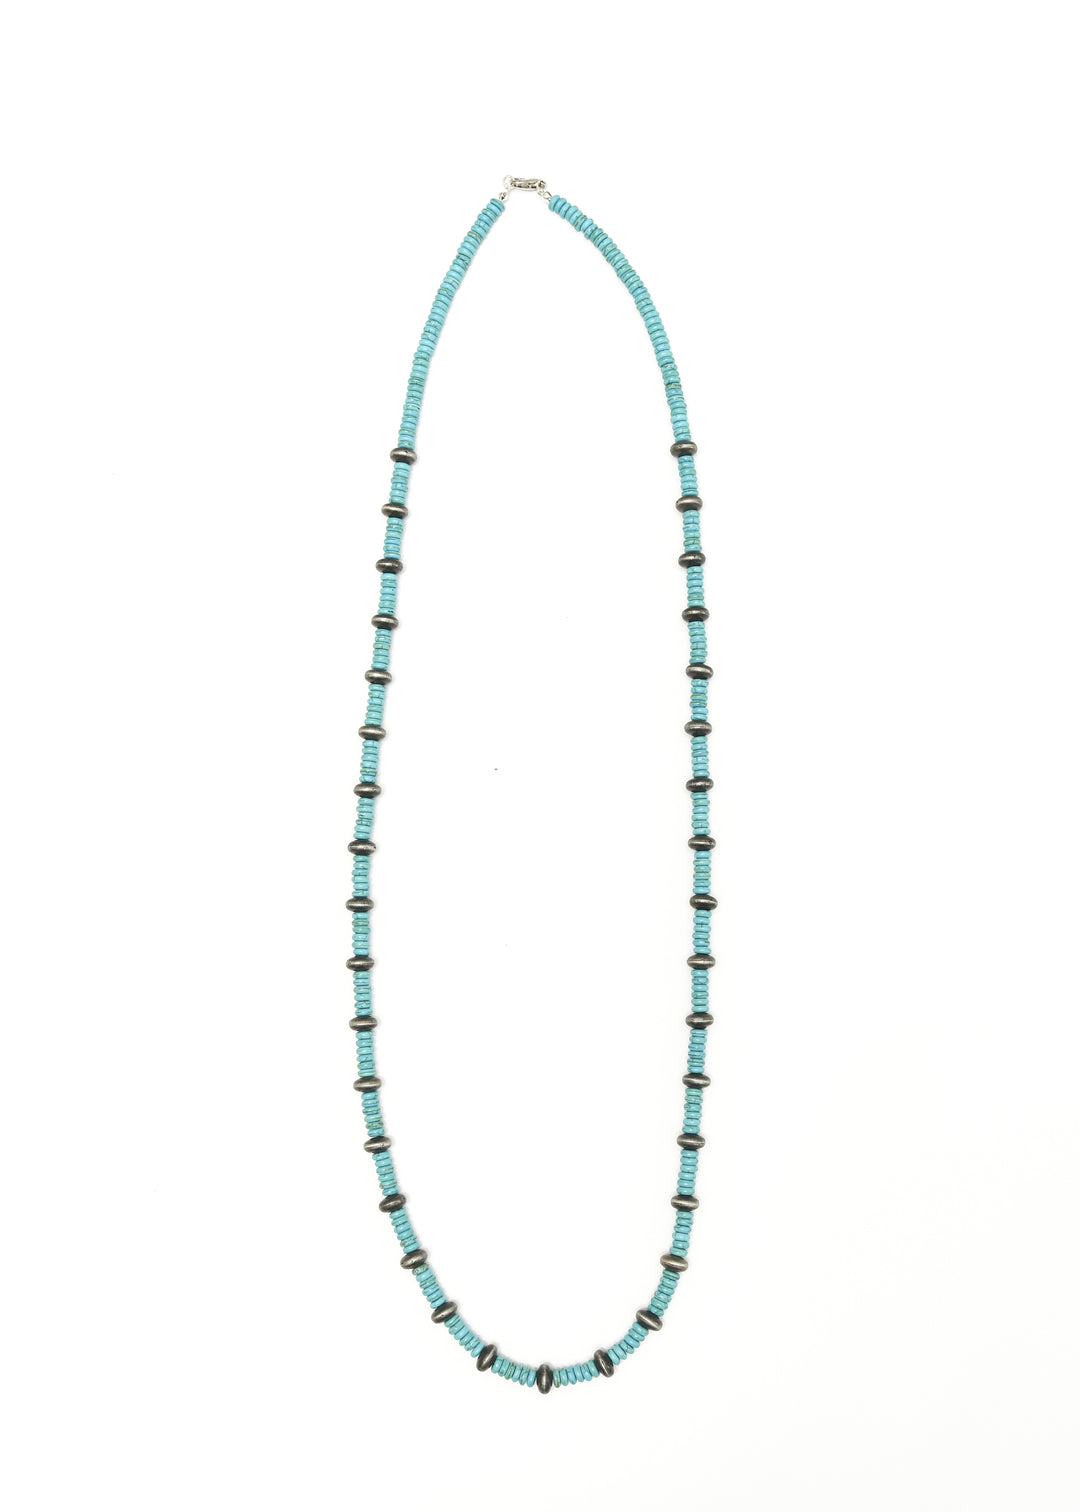 West and Co Turquoise and Navajo Pearl Necklace